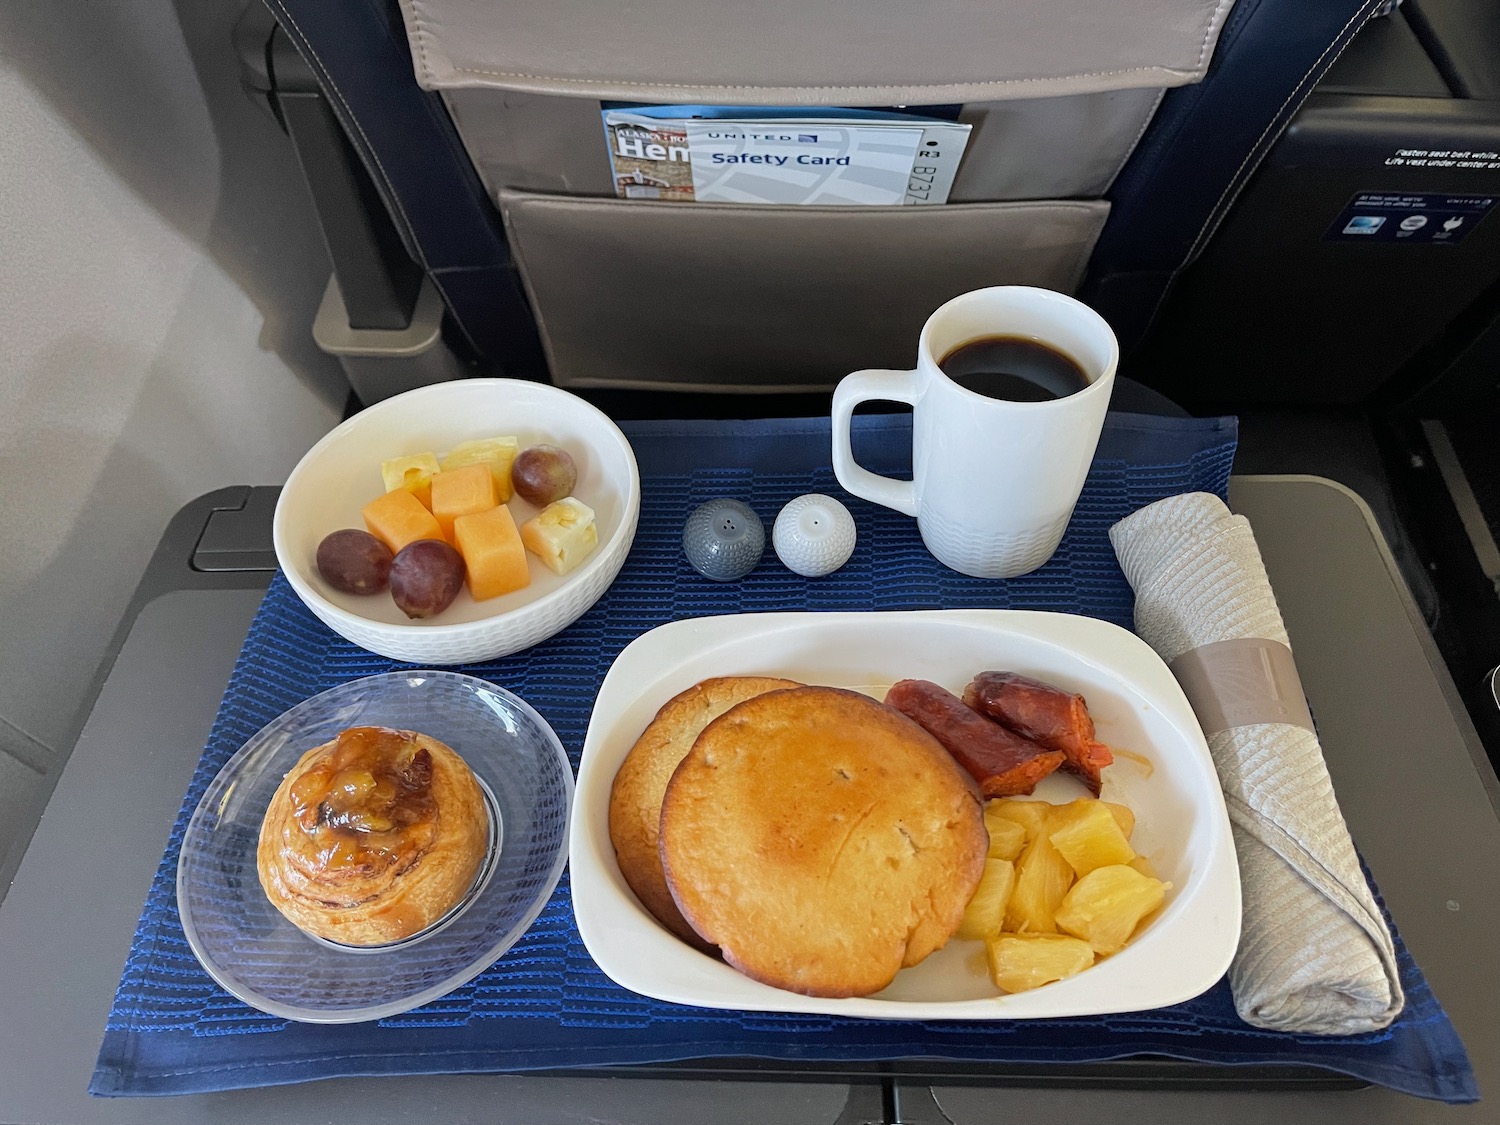 a tray of food and a cup of coffee on a blue place mat